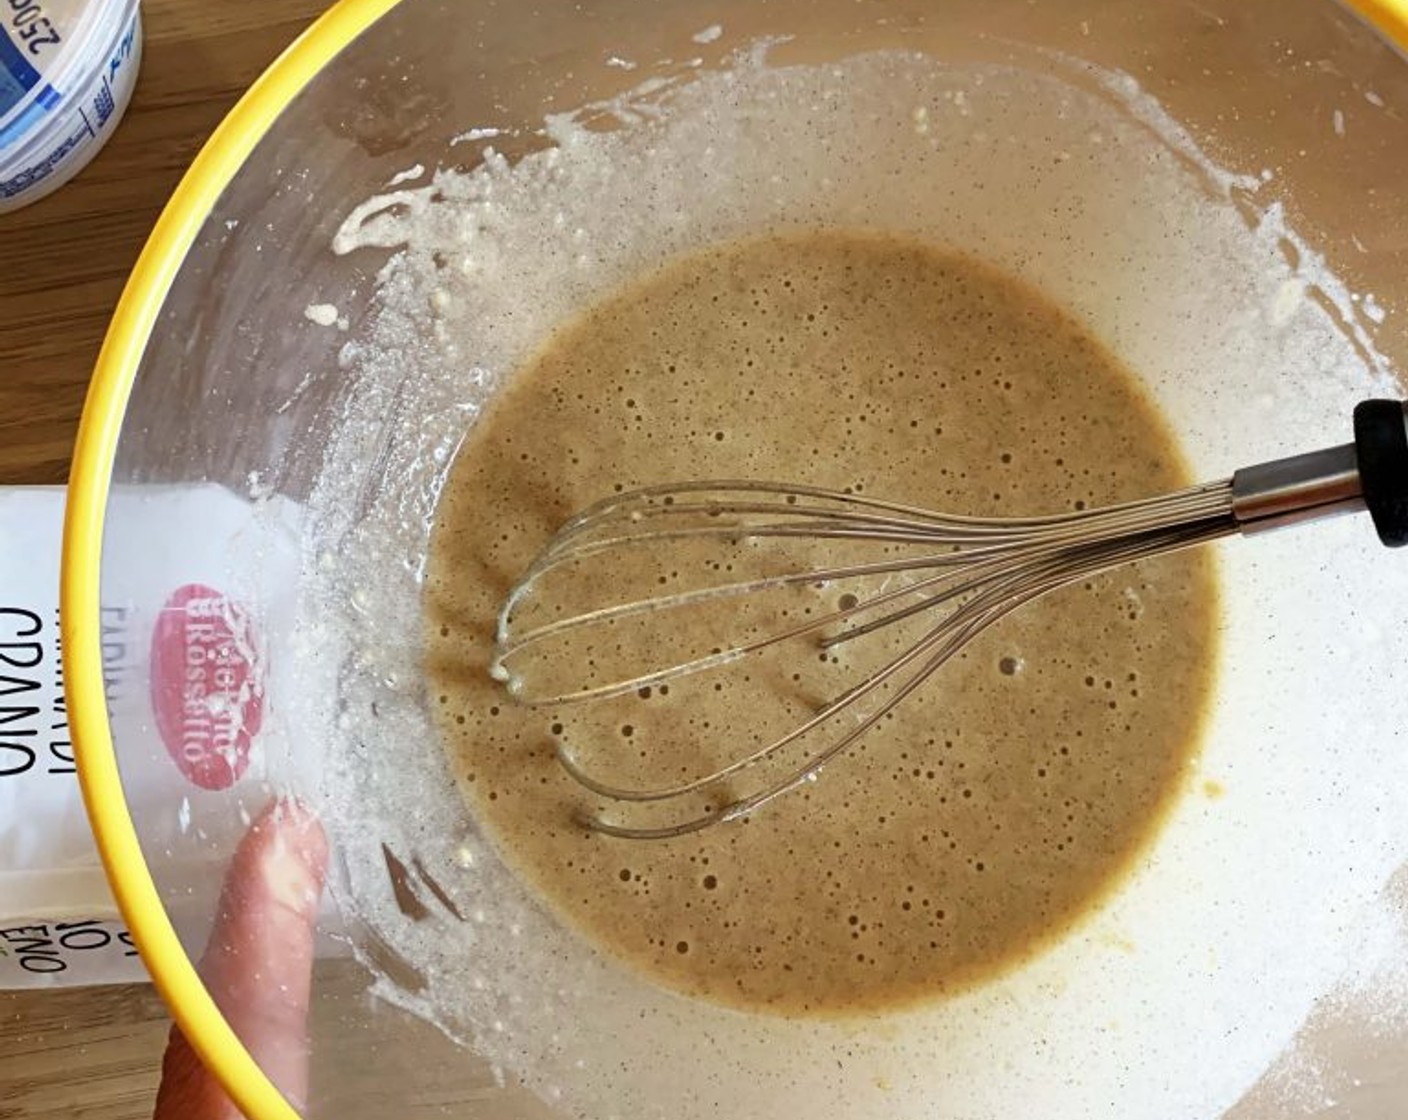 step 2 For the base whisk Egg (1) and Granulated Erythritol (3 Tbsp), add the Orgeat Almond Syrup (0.5 oz), Oil (0.5 oz), Unsweetened Almond Milk (1 oz), and mix until ingredients are well combined. Sift in Almond Flour (1/4 cup), Buckwheat Flour (3 Tbsp), Salt (1 pinch), and Baking Powder (1 1/4 tsp).